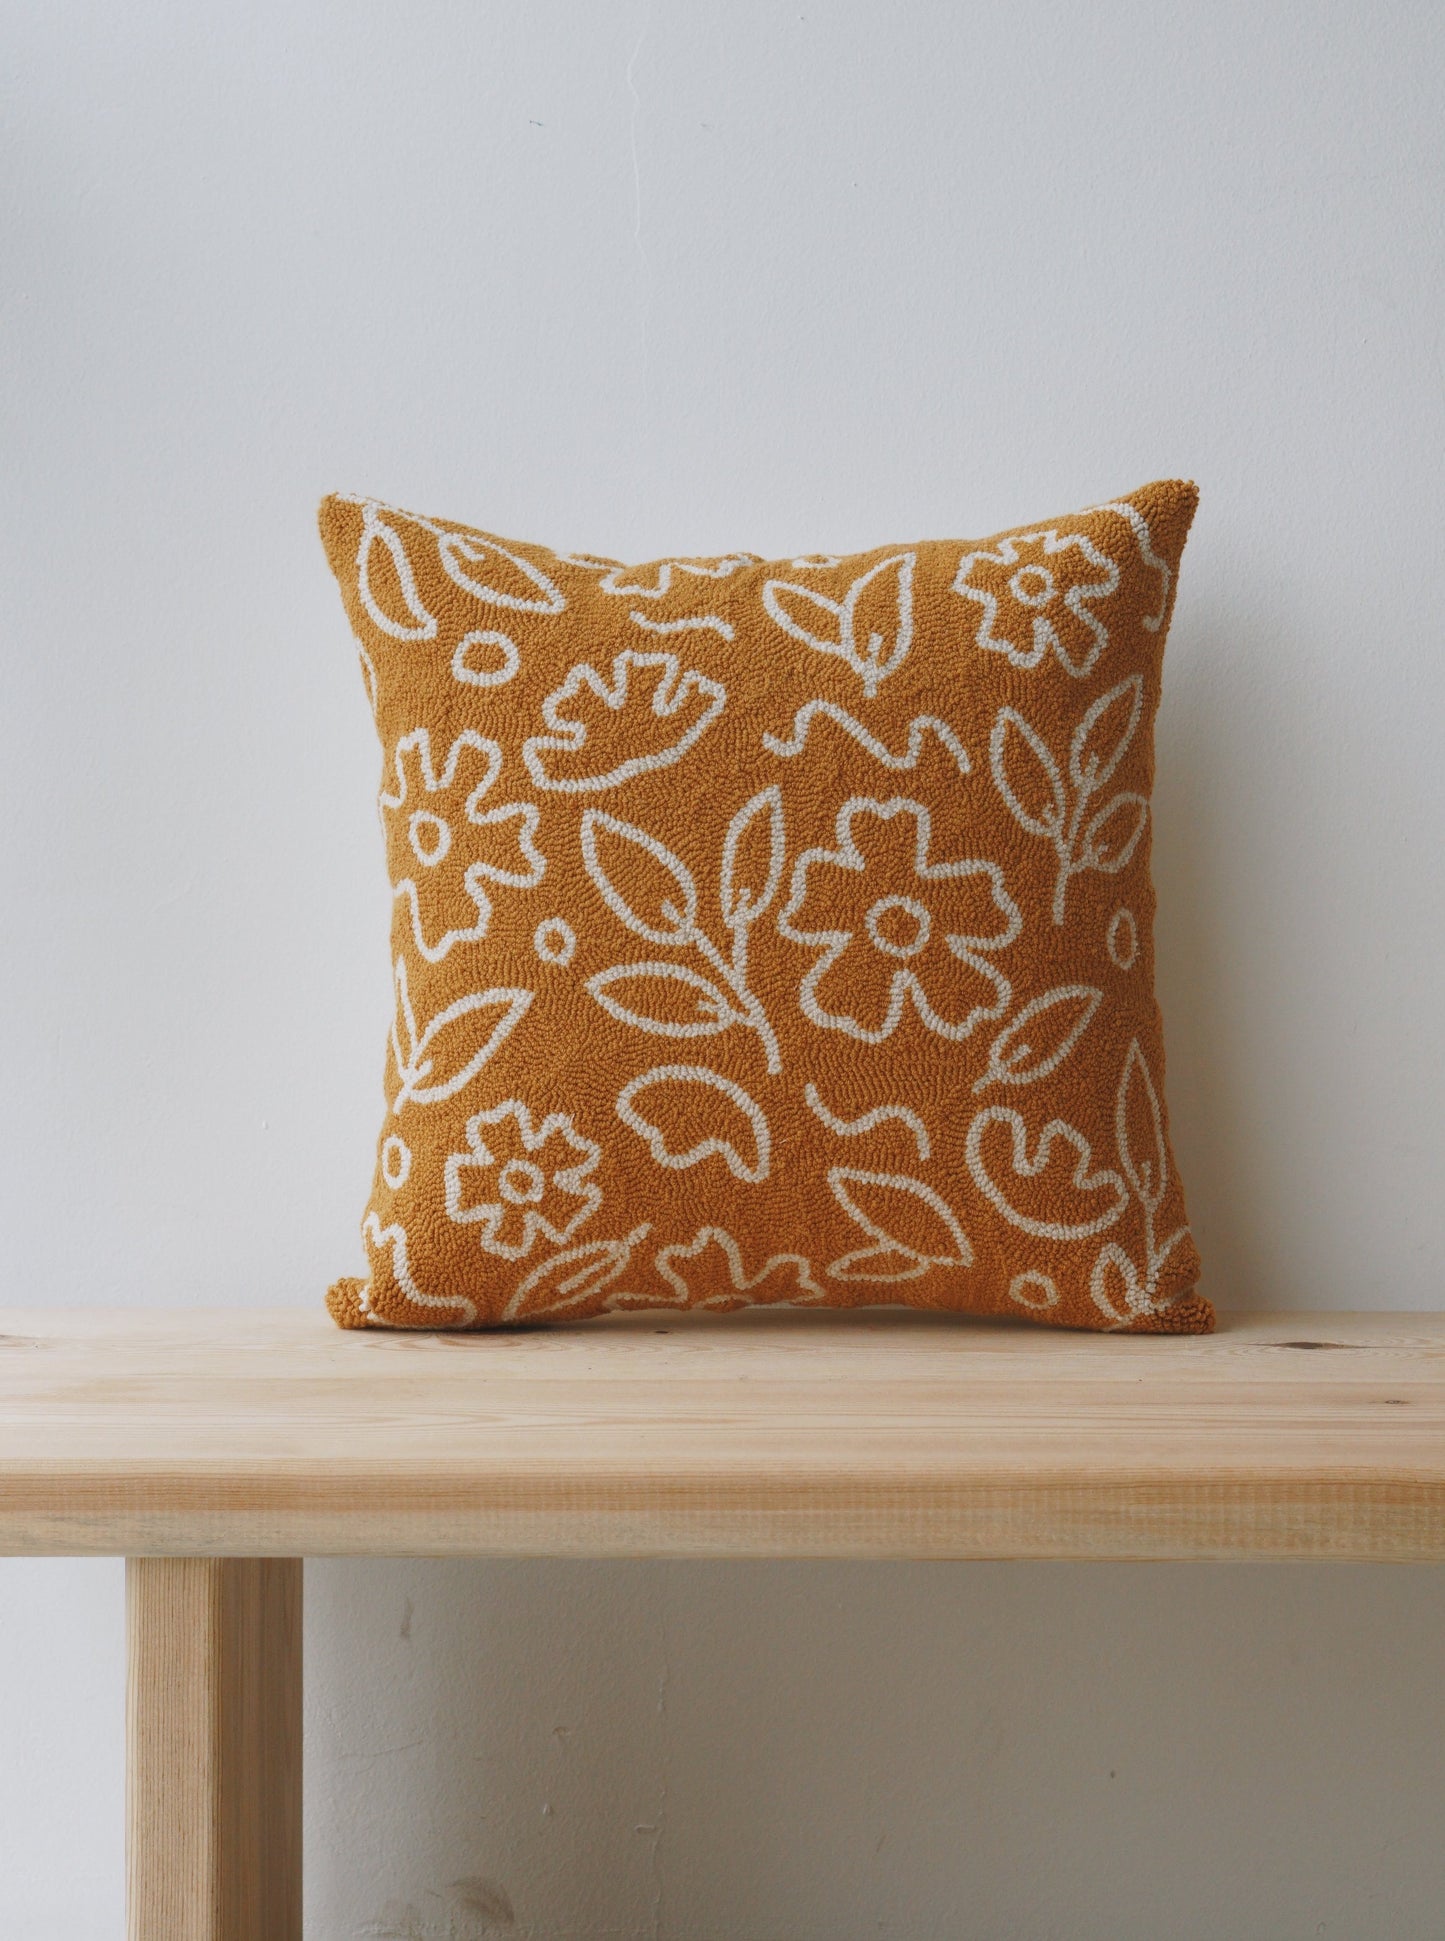 Abstract Floral Cushion